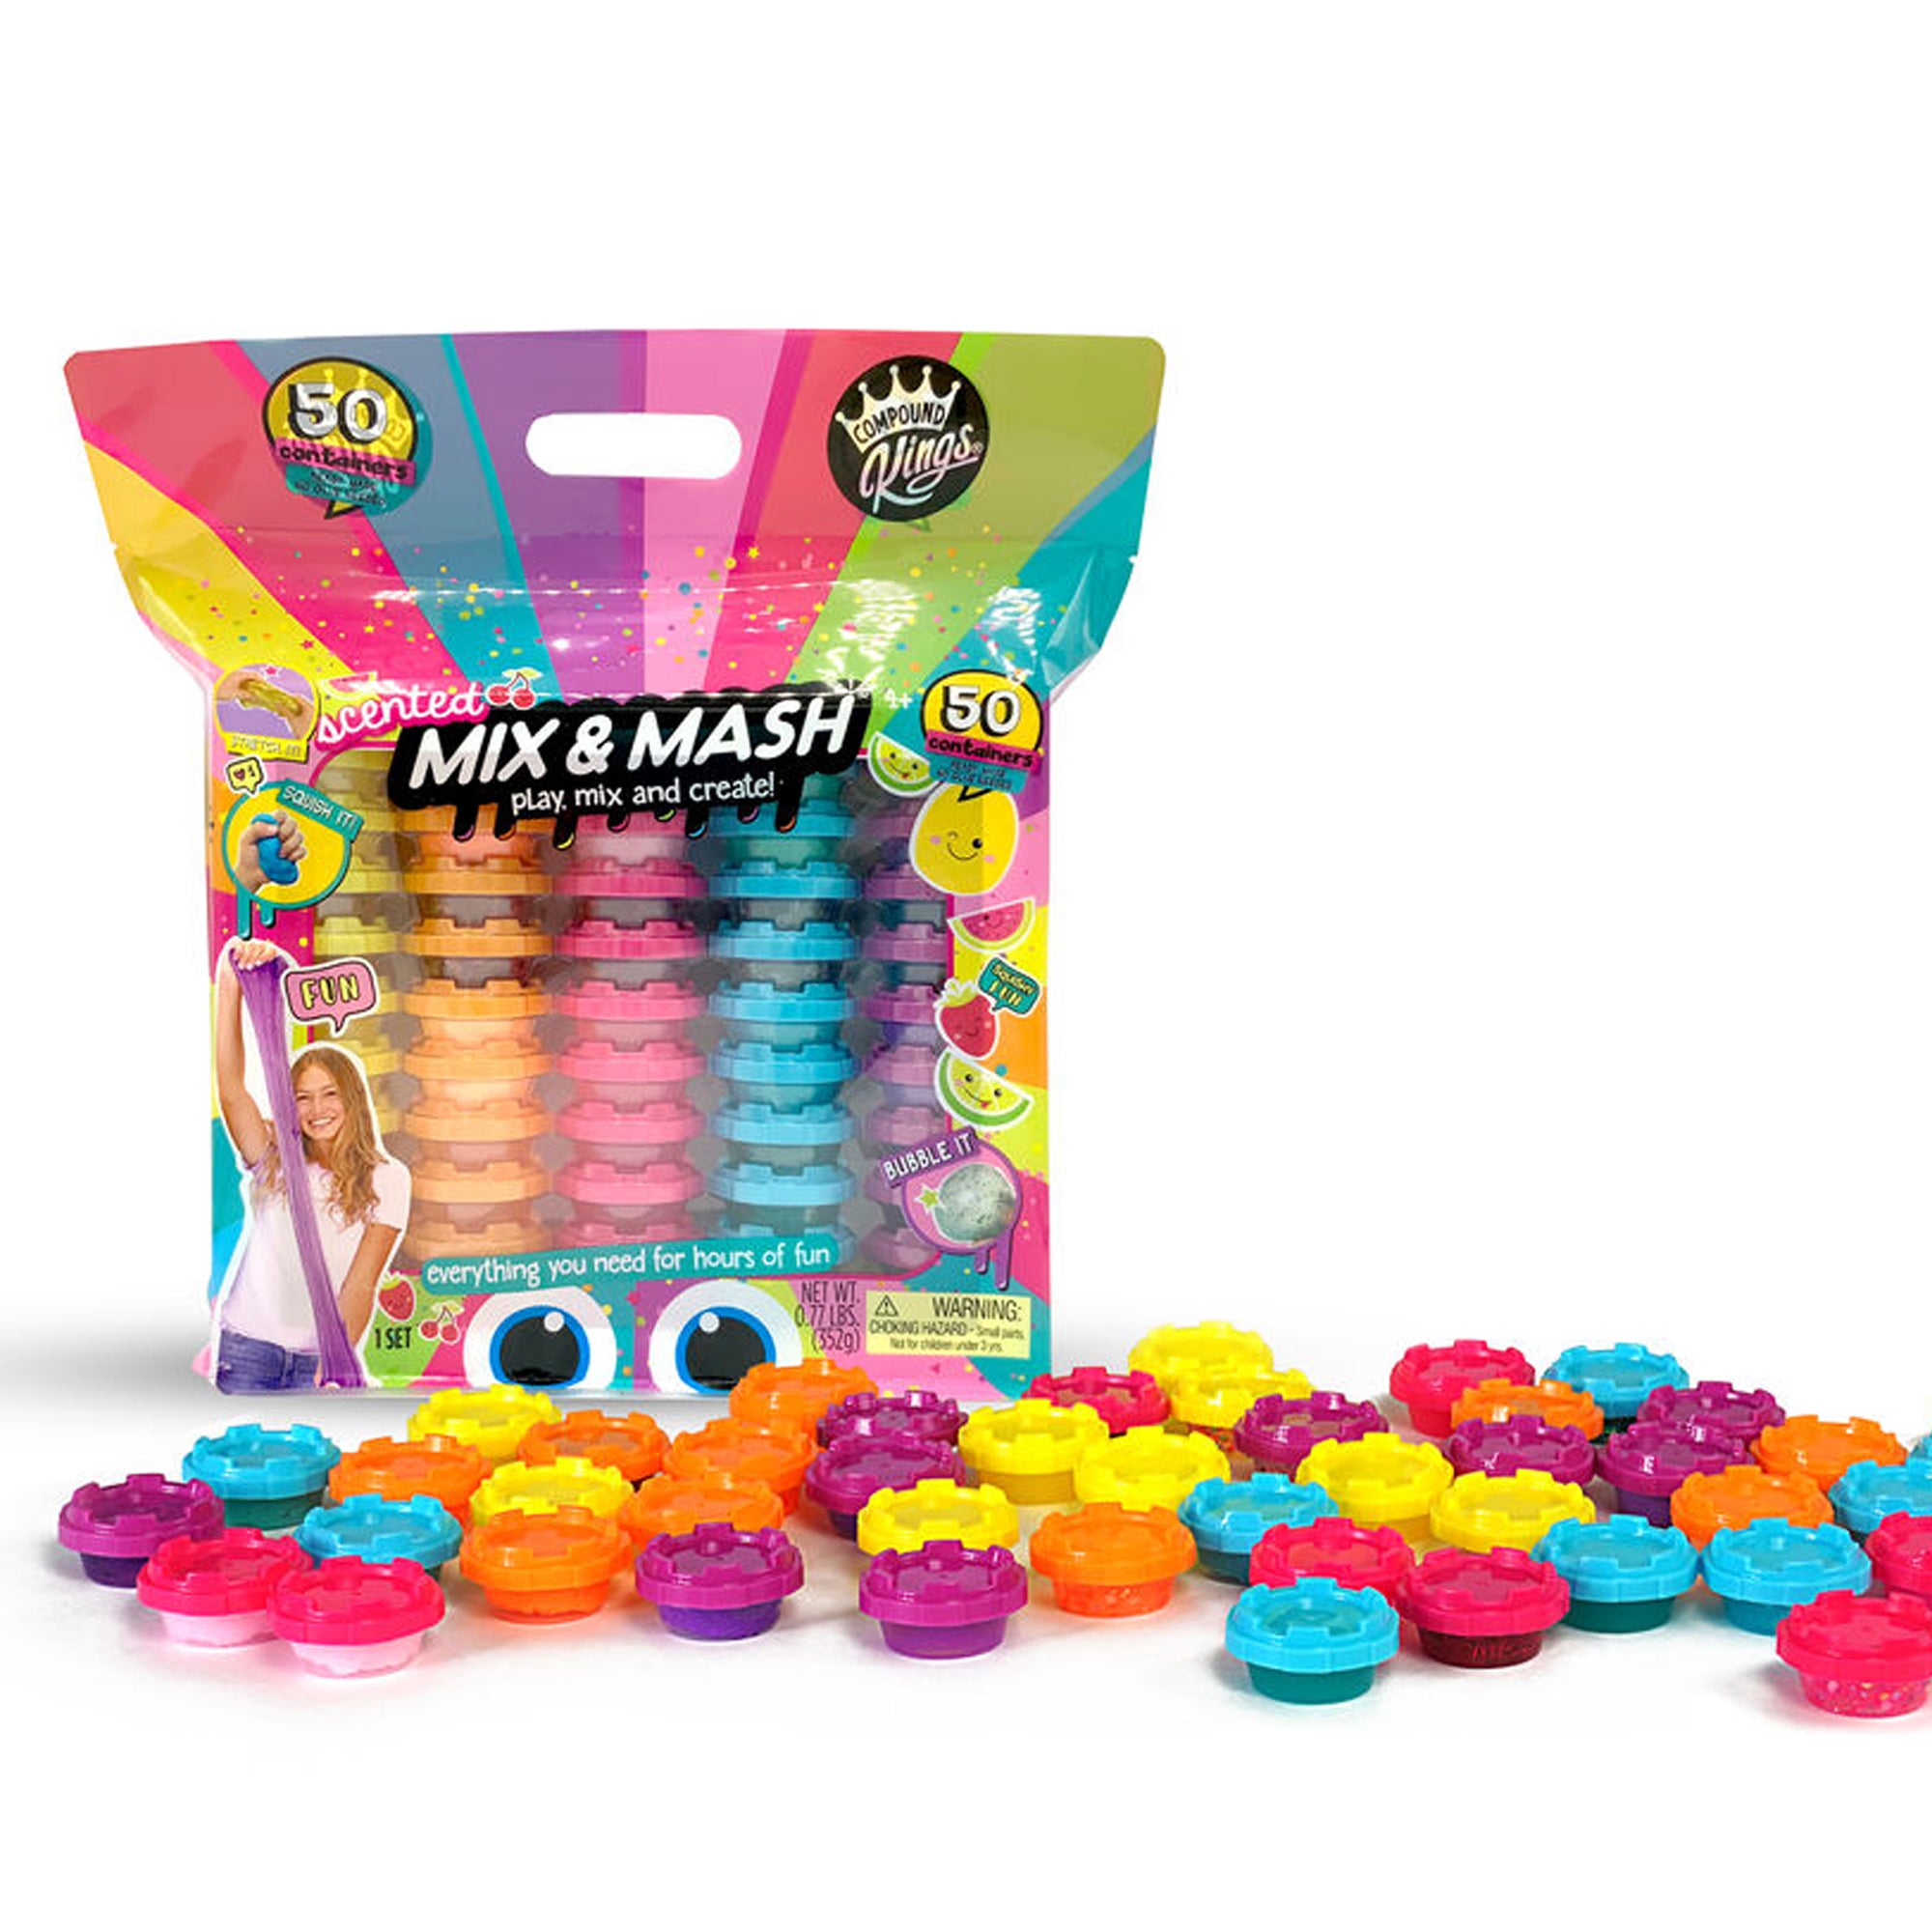 COMPOUND KINGS - Squishy Slime Stress Ball Kit - DIY Slime Stress Ball  Maker - Pink Packaging